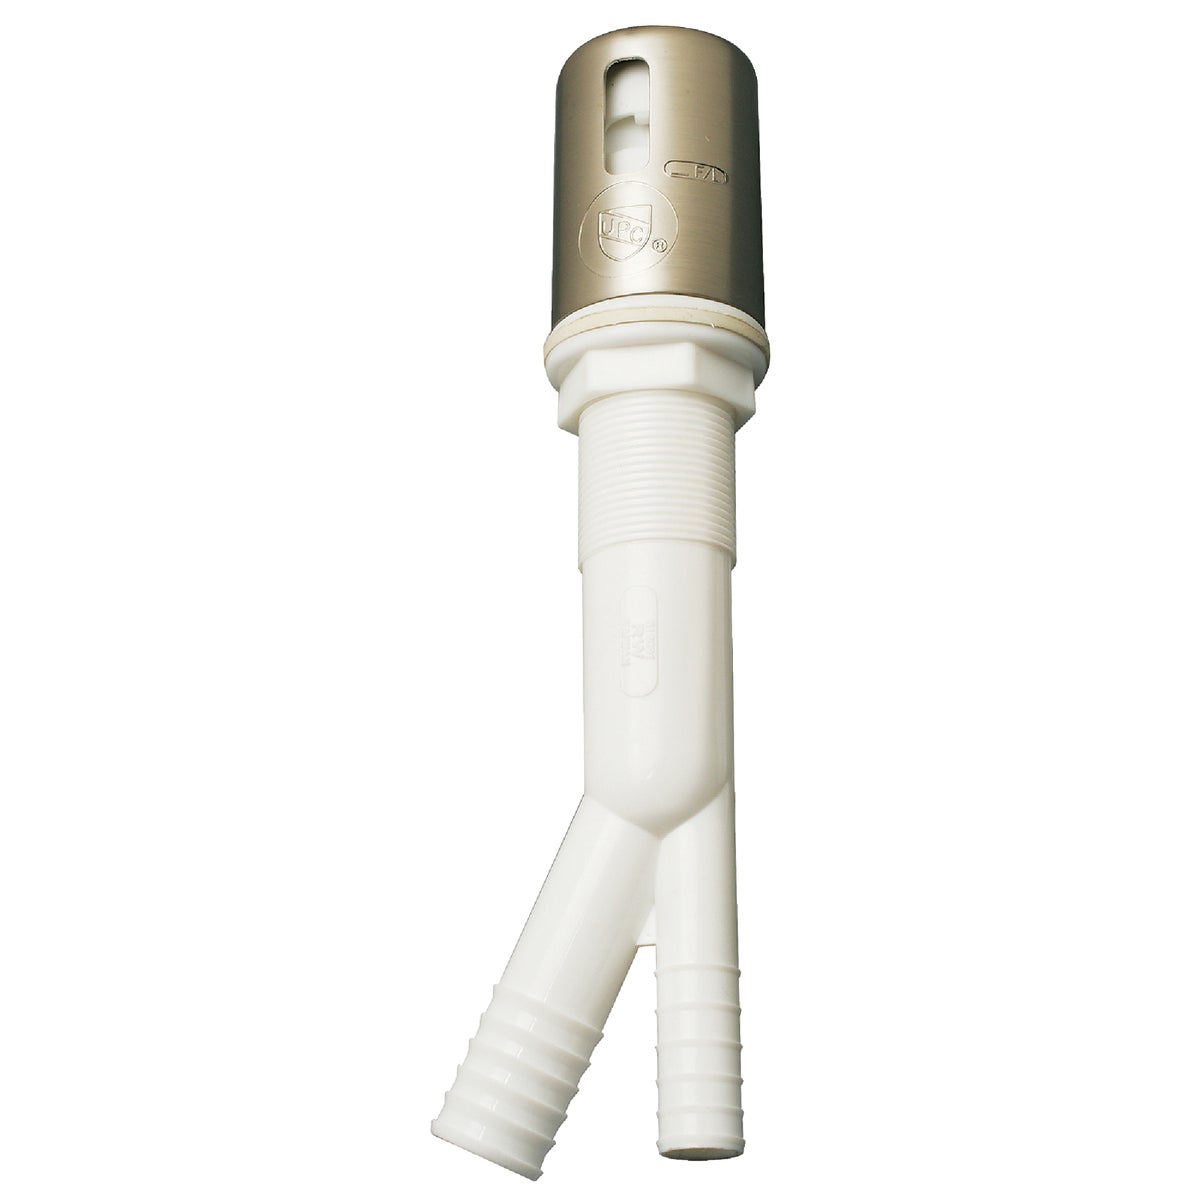 Do it 7/8 In. x 5/8 In. Brushed Nickel Dishwasher Air Gap